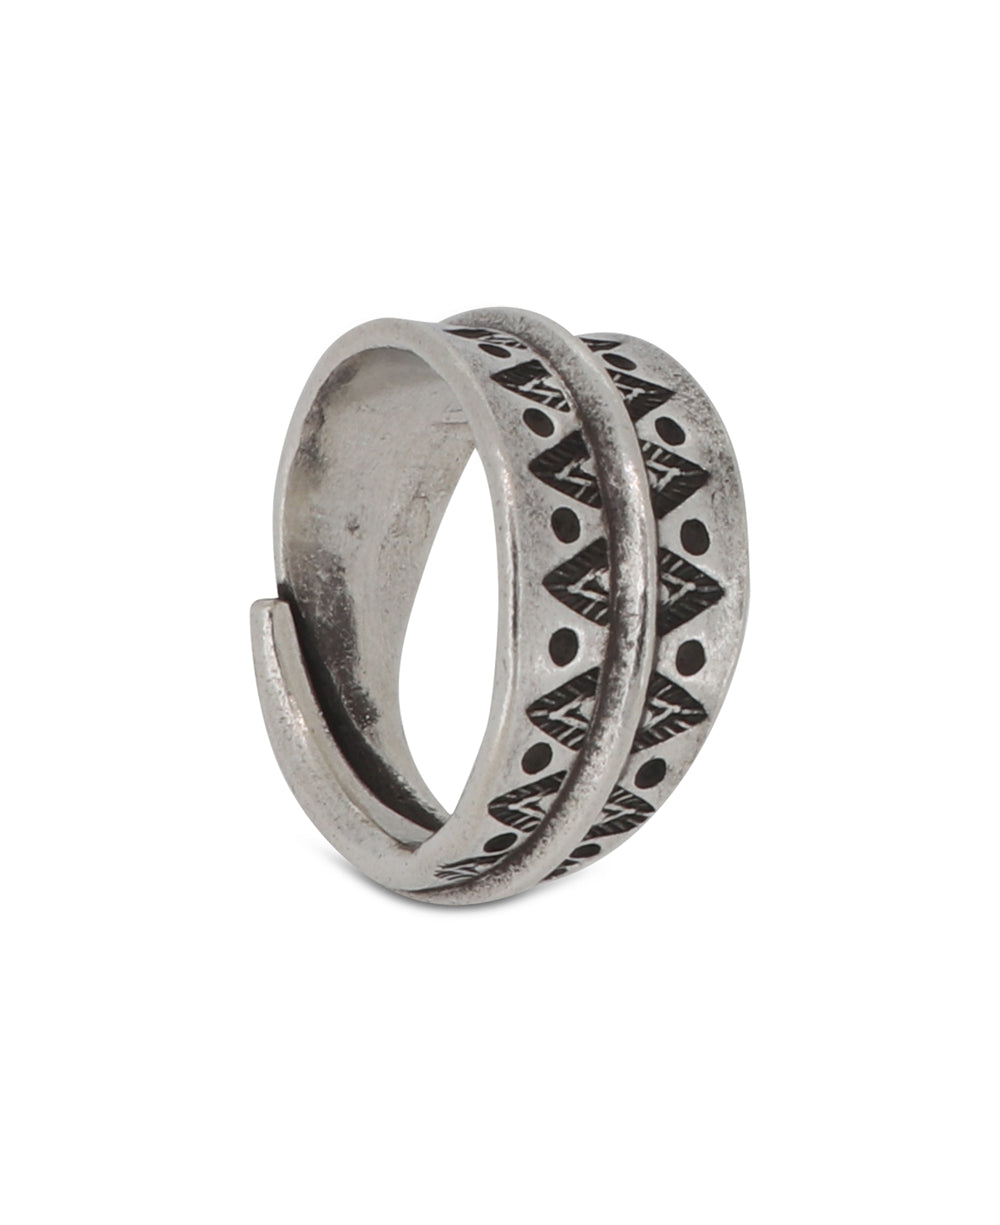 Unisex Thai Hilltribe Silver Ring with Triangular Tribal Etchings